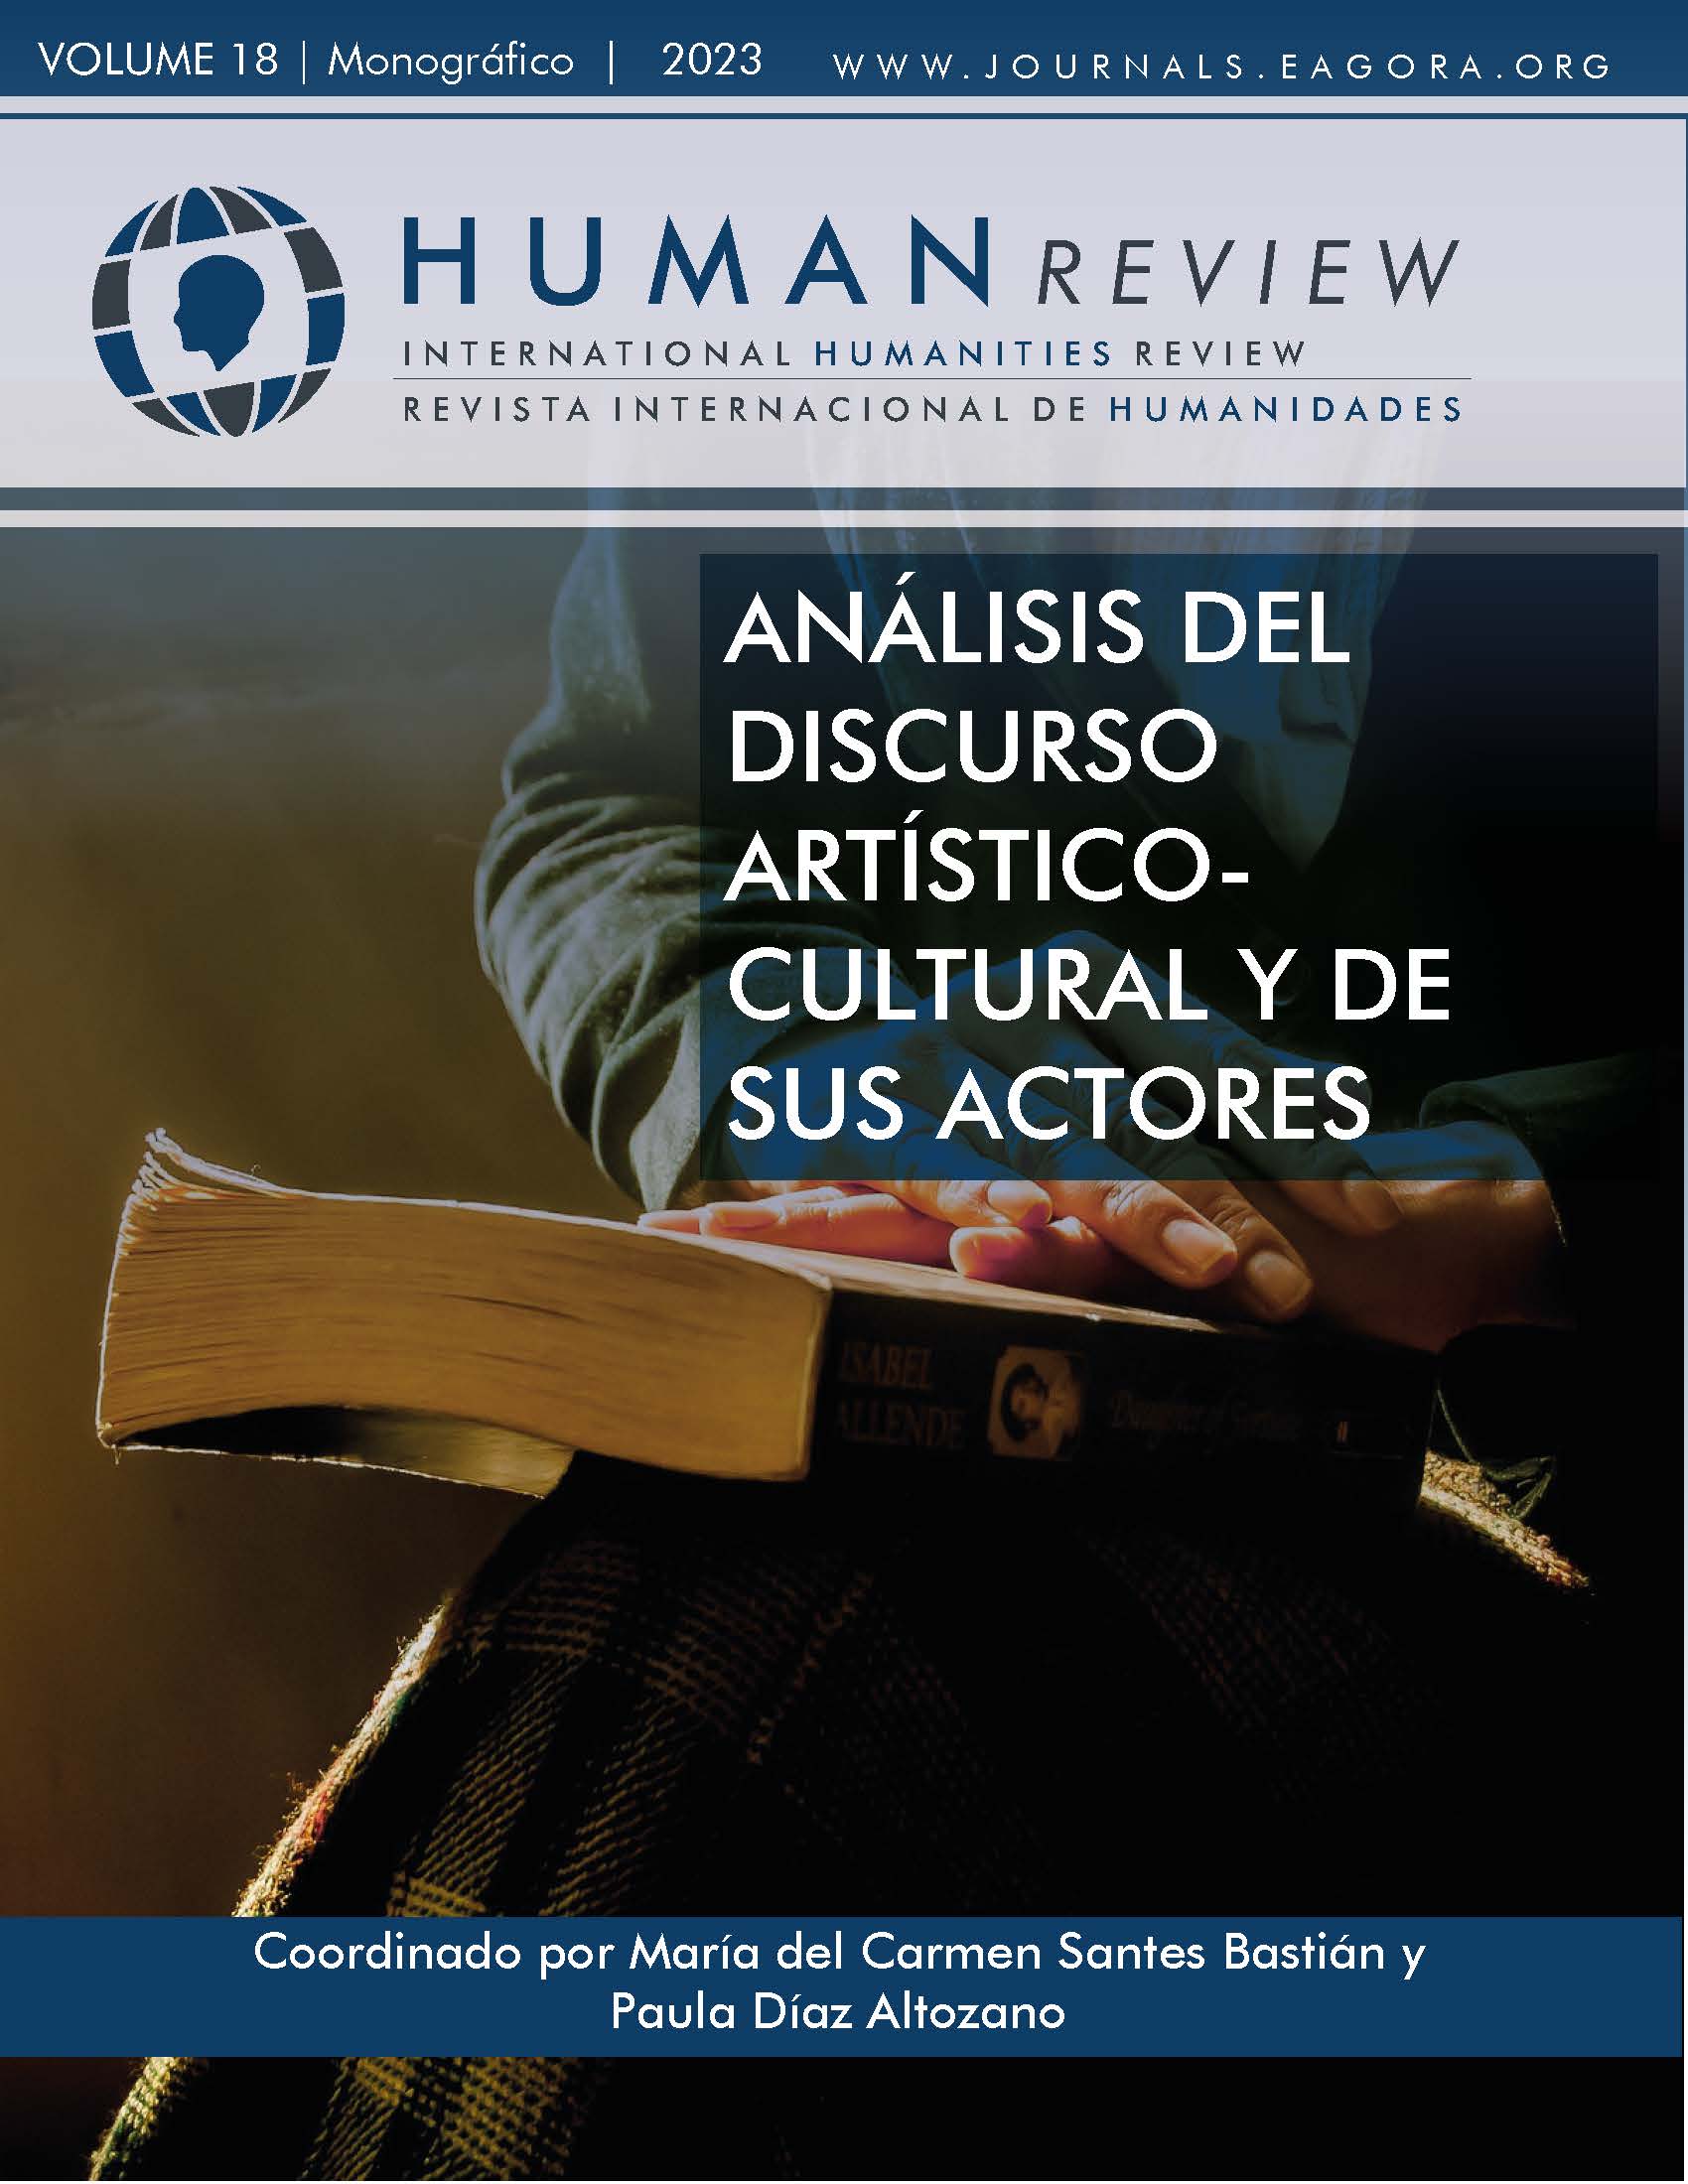 					View Vol. 18 No. 4 (2023): Monograph: "Analysis of the artistic-cultural discourse and its actors"
				